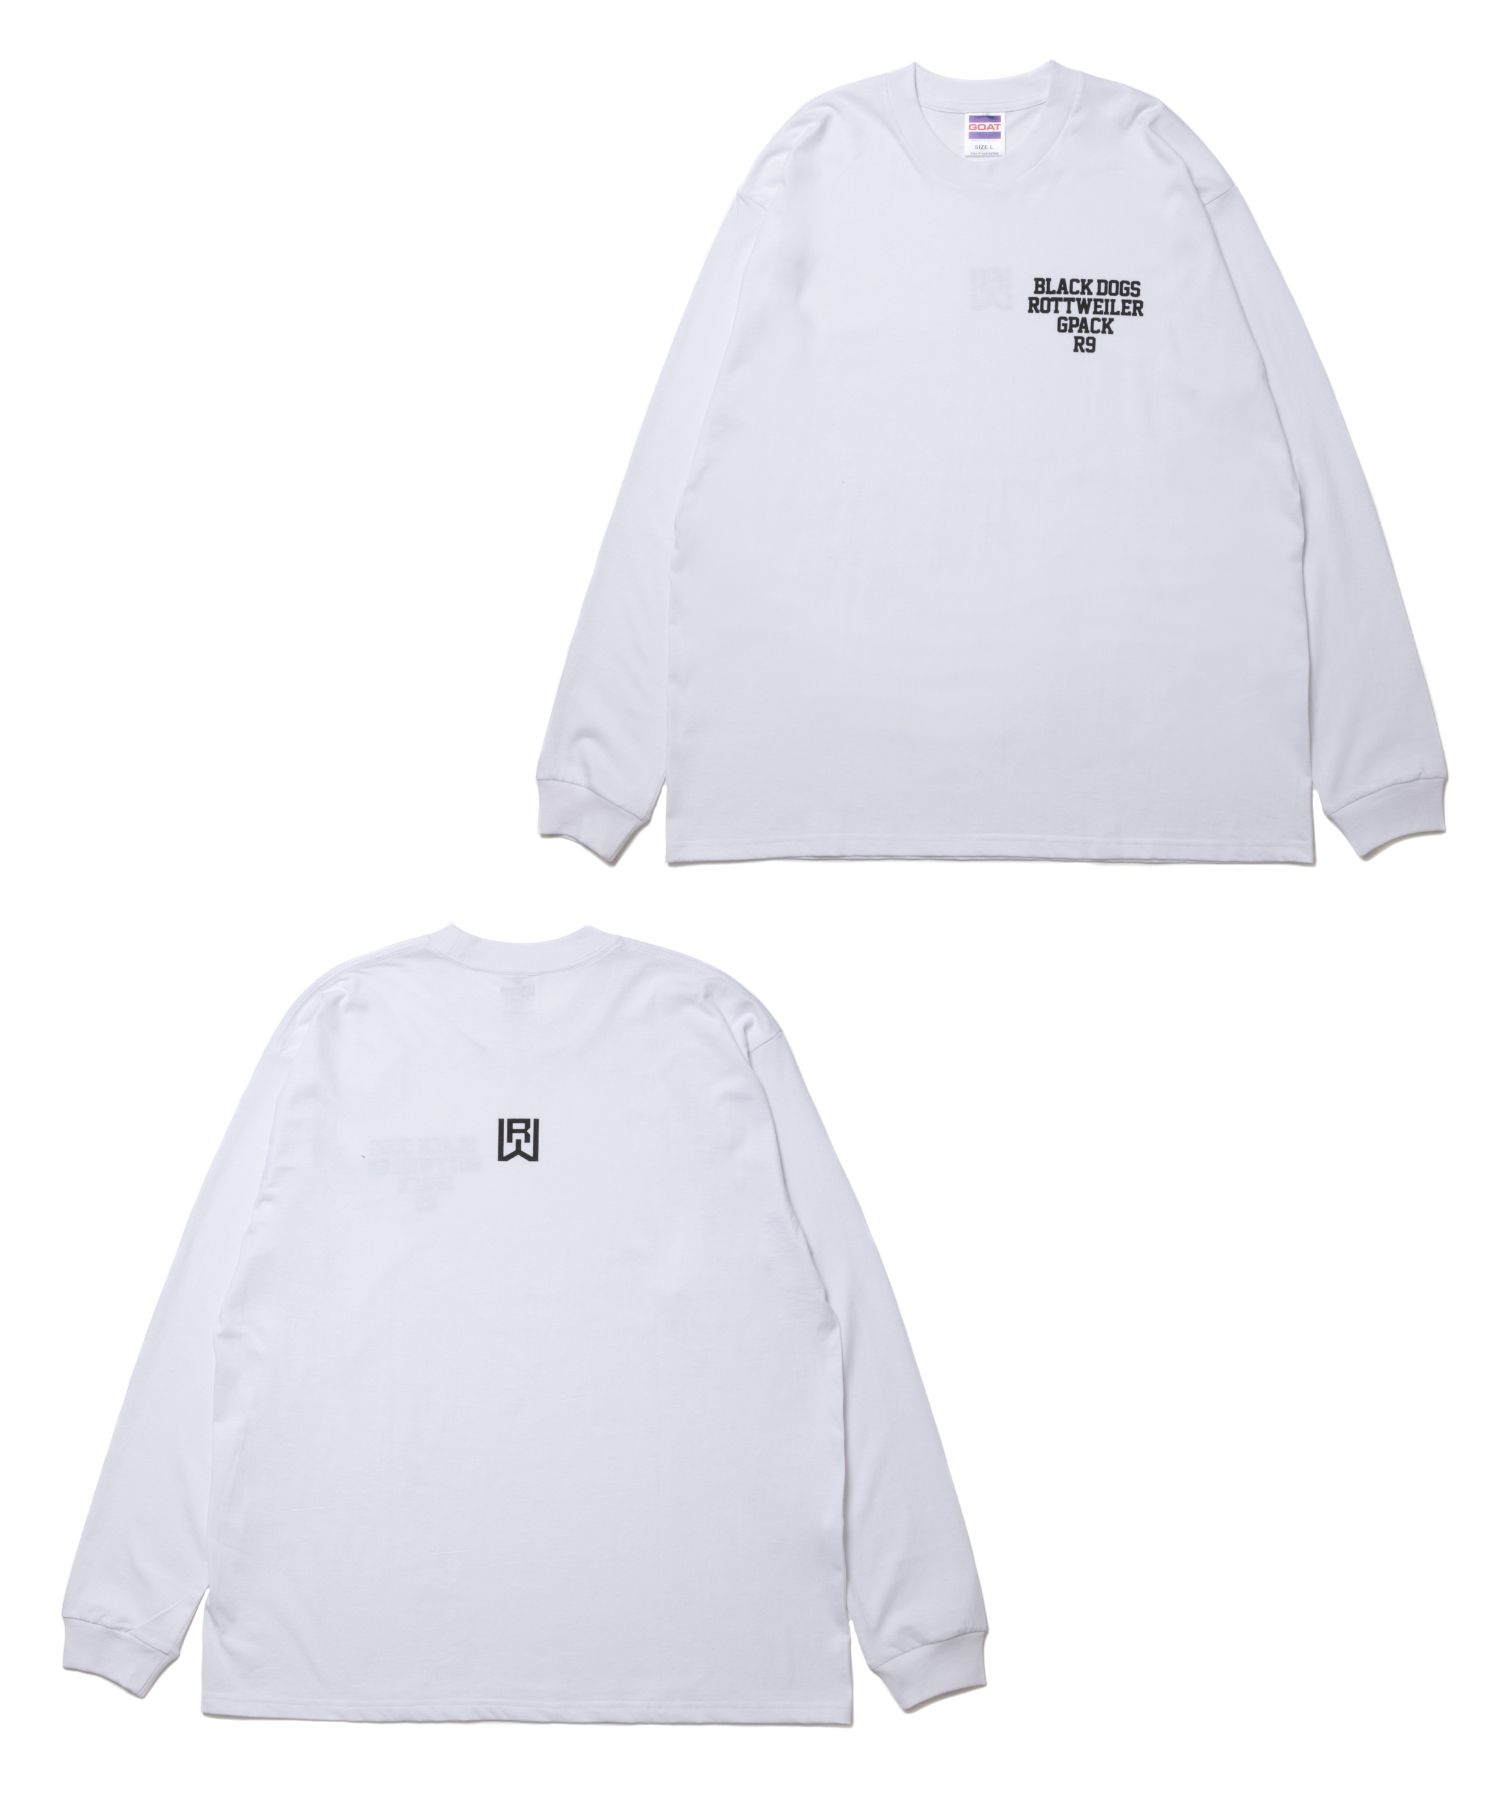 ROTTWEILER - COLLEGE RW L/S TEE (BLACK) / プリントロンT | LOOPHOLE